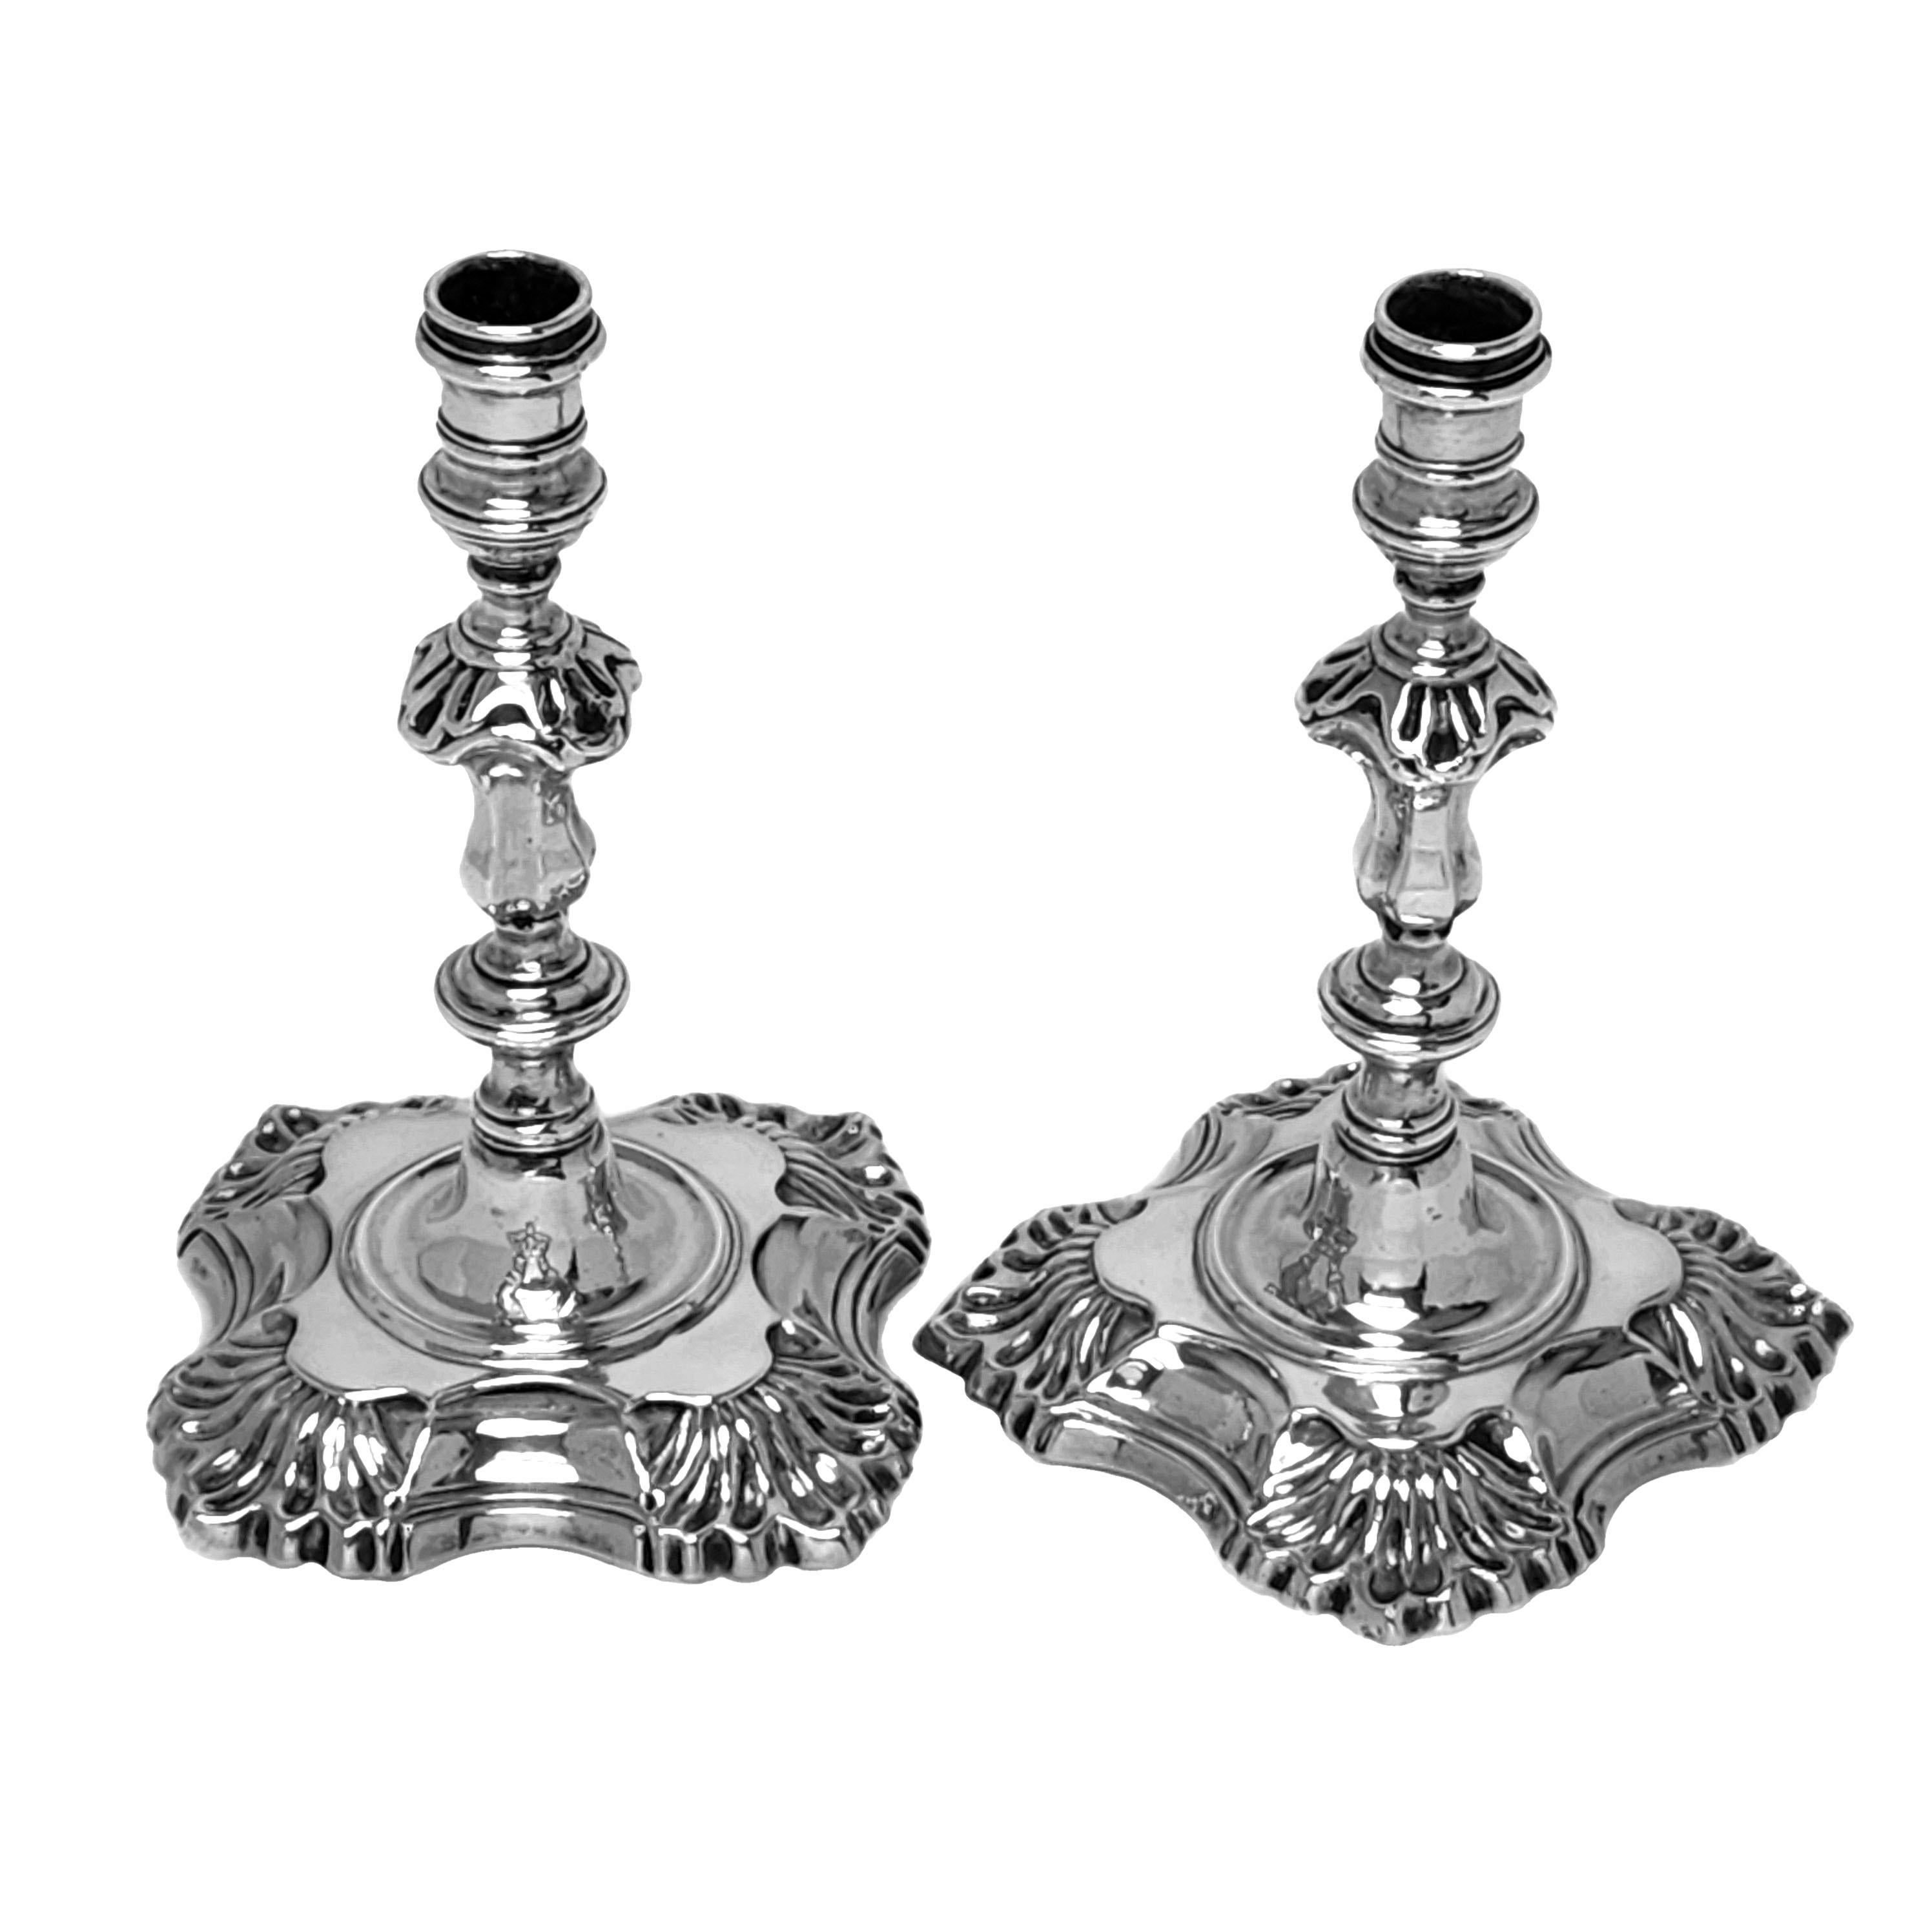 A pair of Antique George II sterling Silver Tapersticks. These early Georgian cast silver Candlesticks have a classic shell quatrefoil design with knopped columns.

Made in London, England in 1744 by James Gould.

Approx. Weight - 338g /